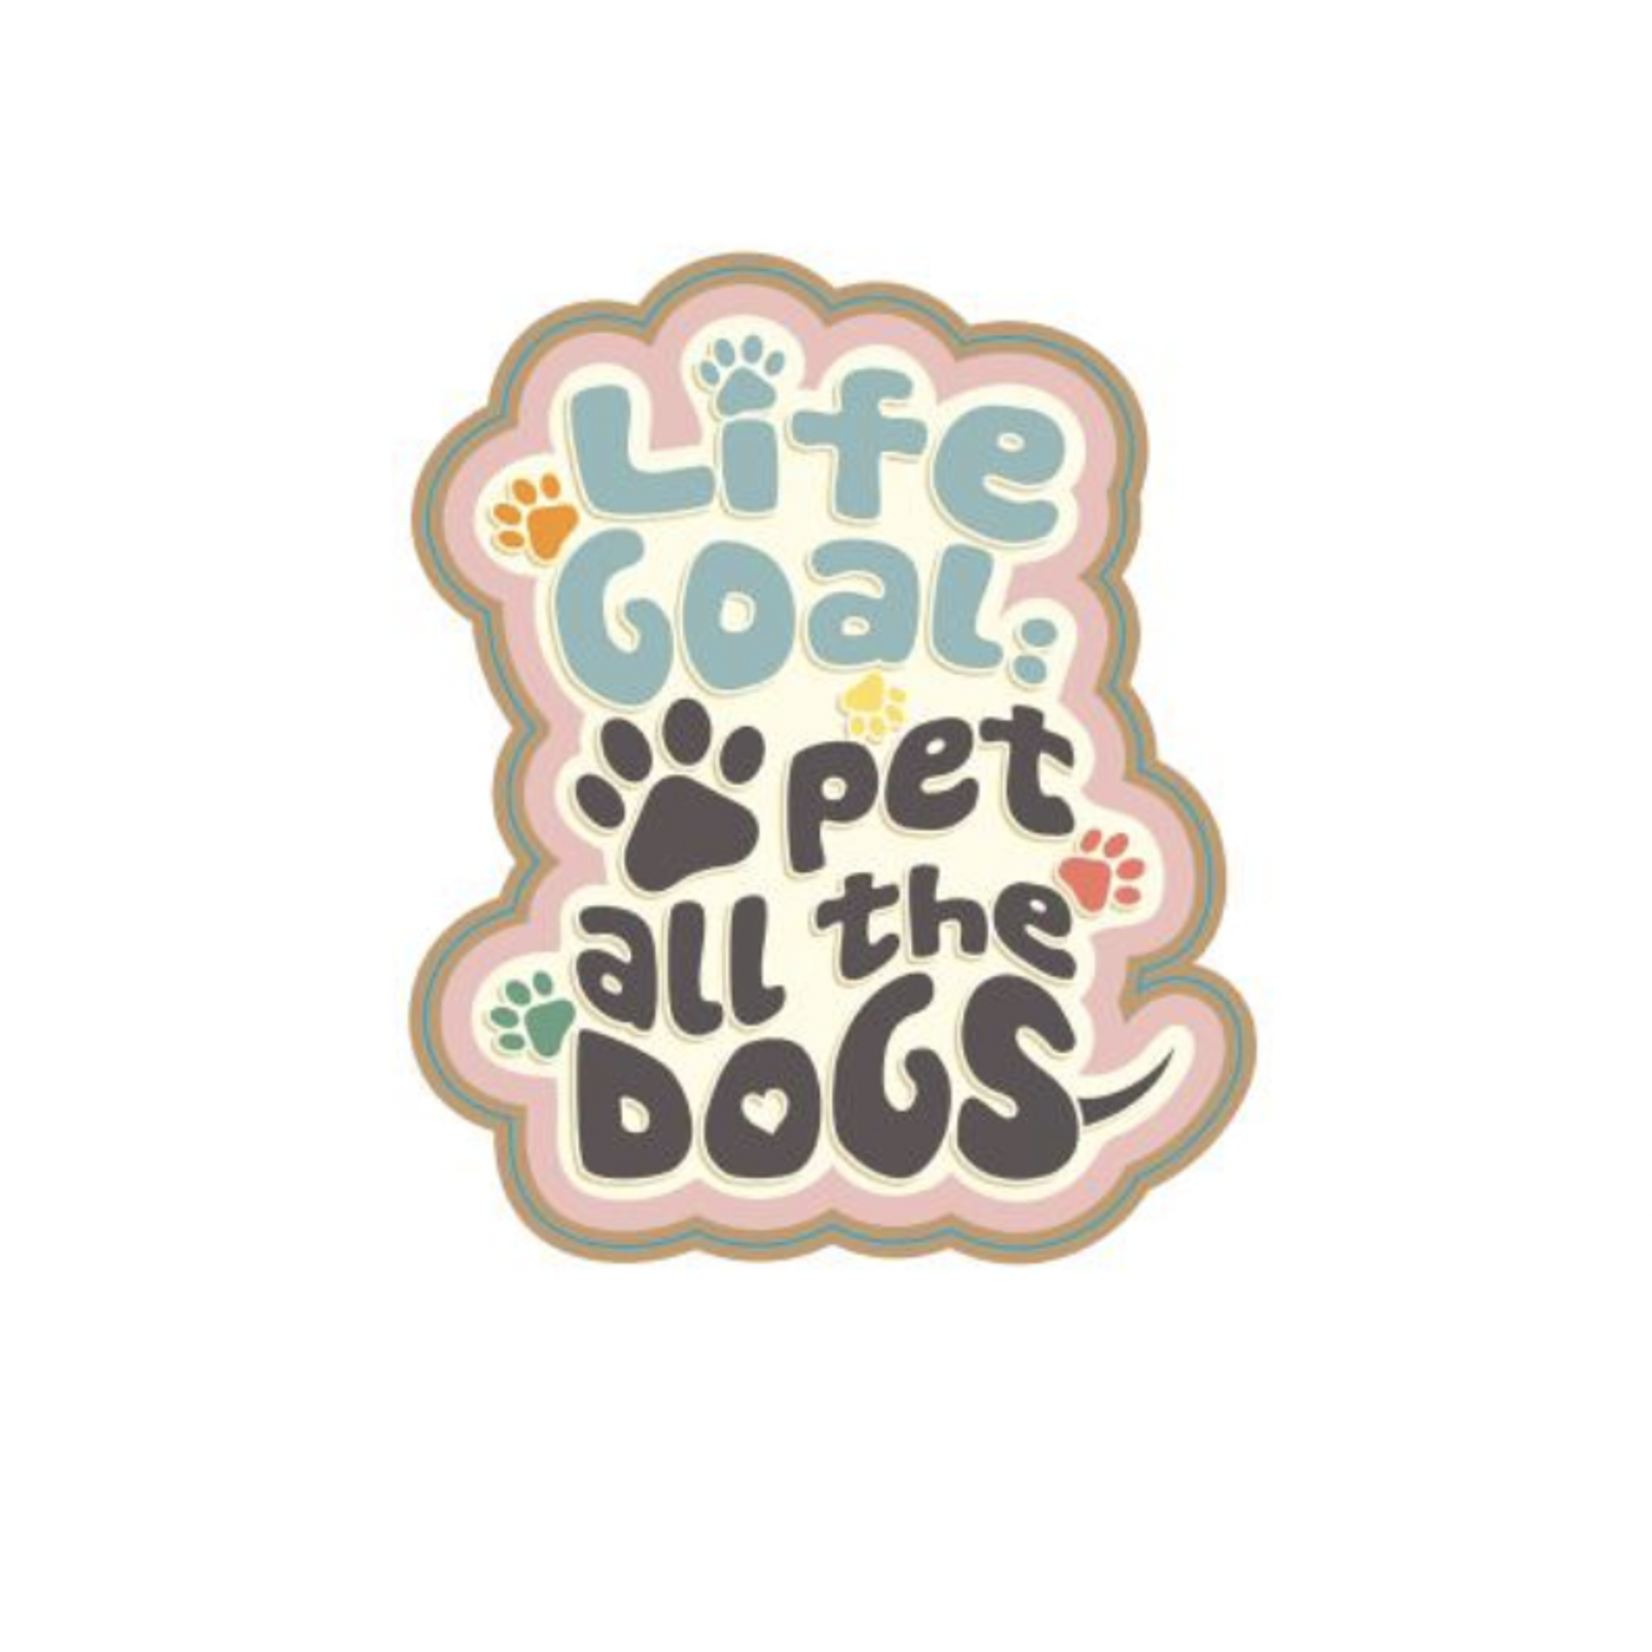 STICKER PACK Dog Sayings - Pet All The Dogs - Sticker - Small